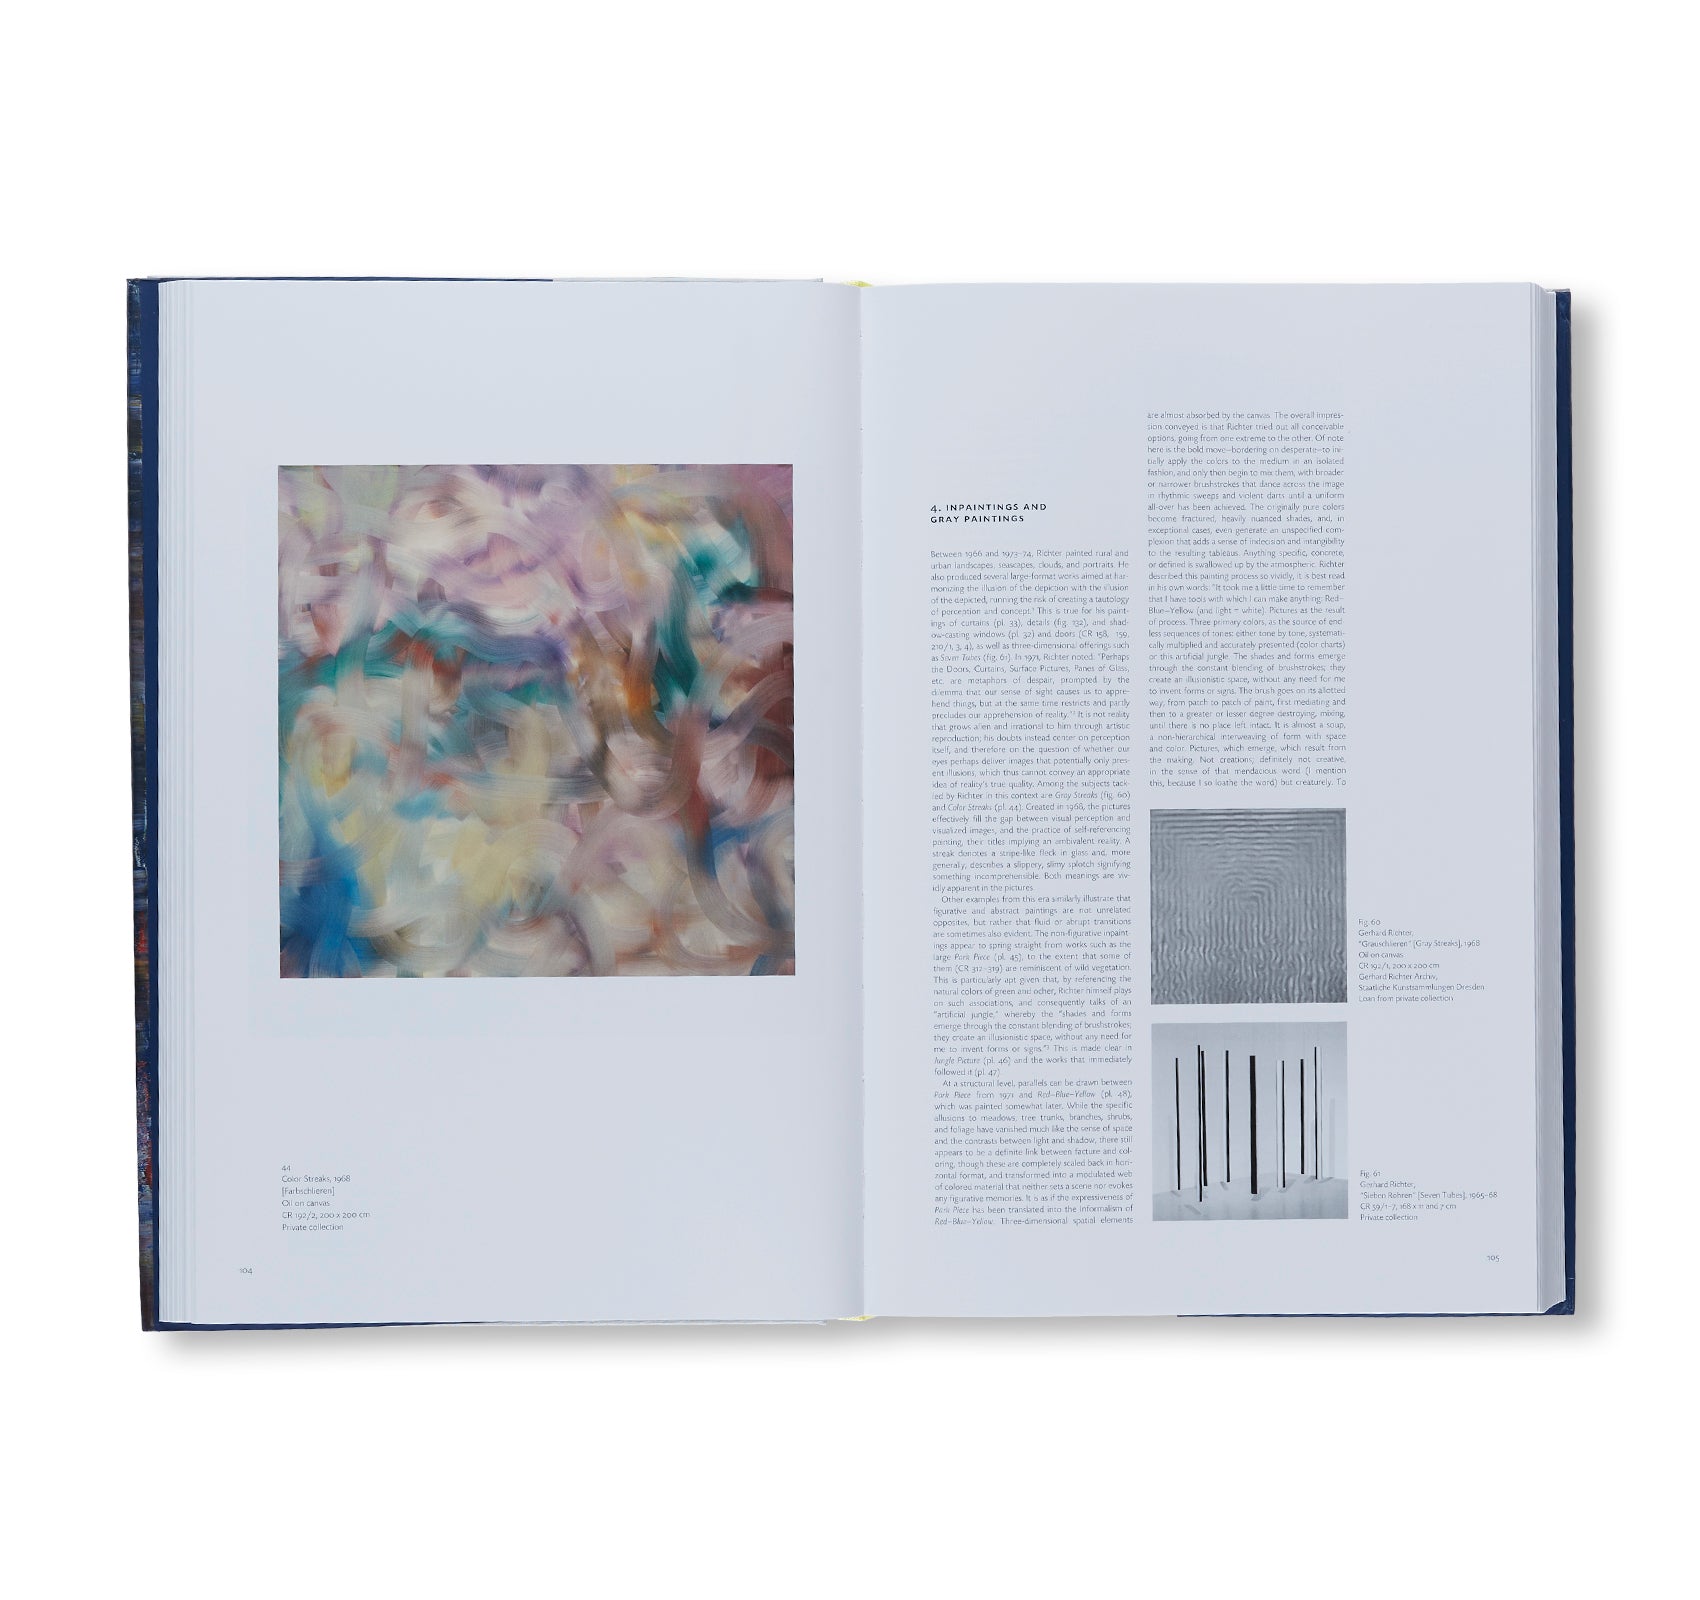 GERHARD RICHTER LIFE AND WORK: IN PAINTING THINKING IS PAINTING by Gerhard Richter